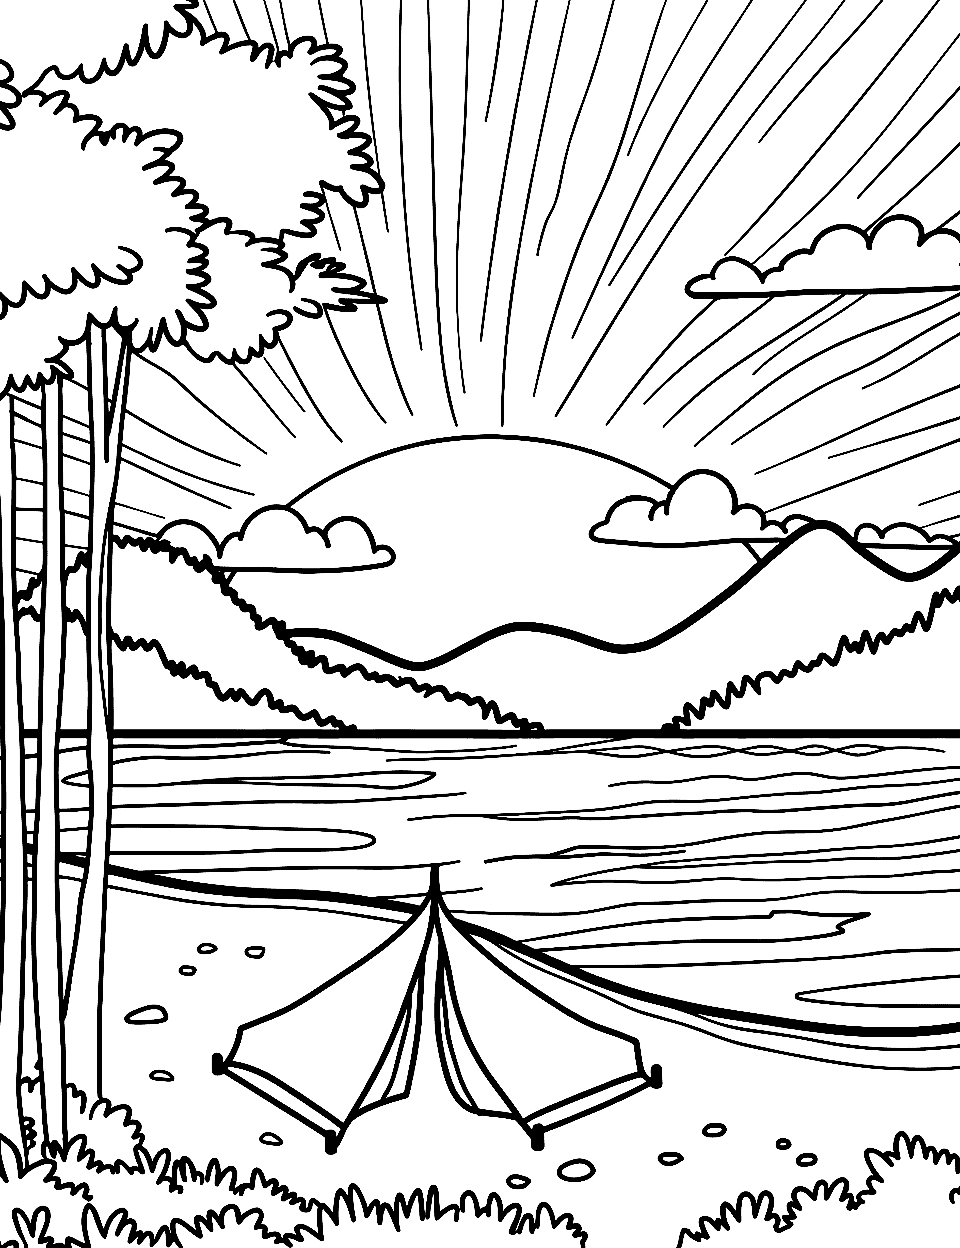 Sunset at the Campground Camping Coloring Page - A beautiful sunset over a campground.